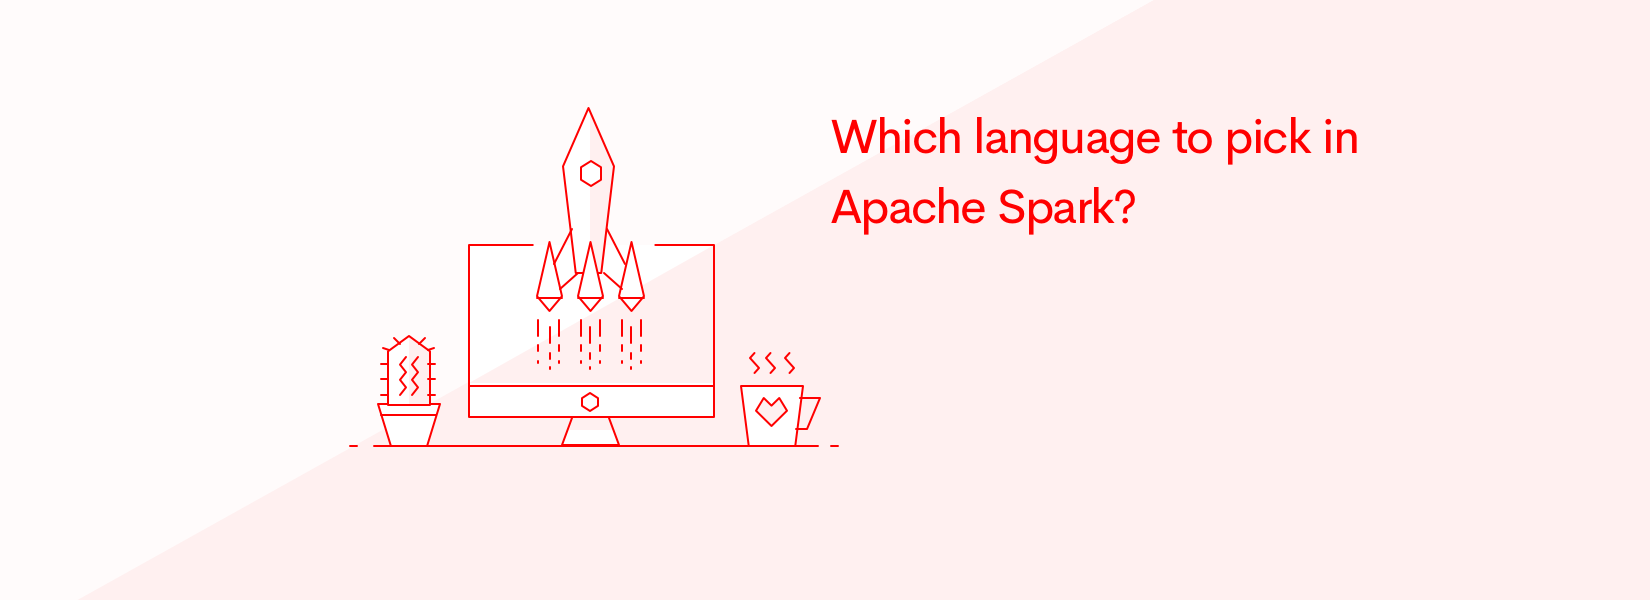 Apache Spark - Which language to pick?